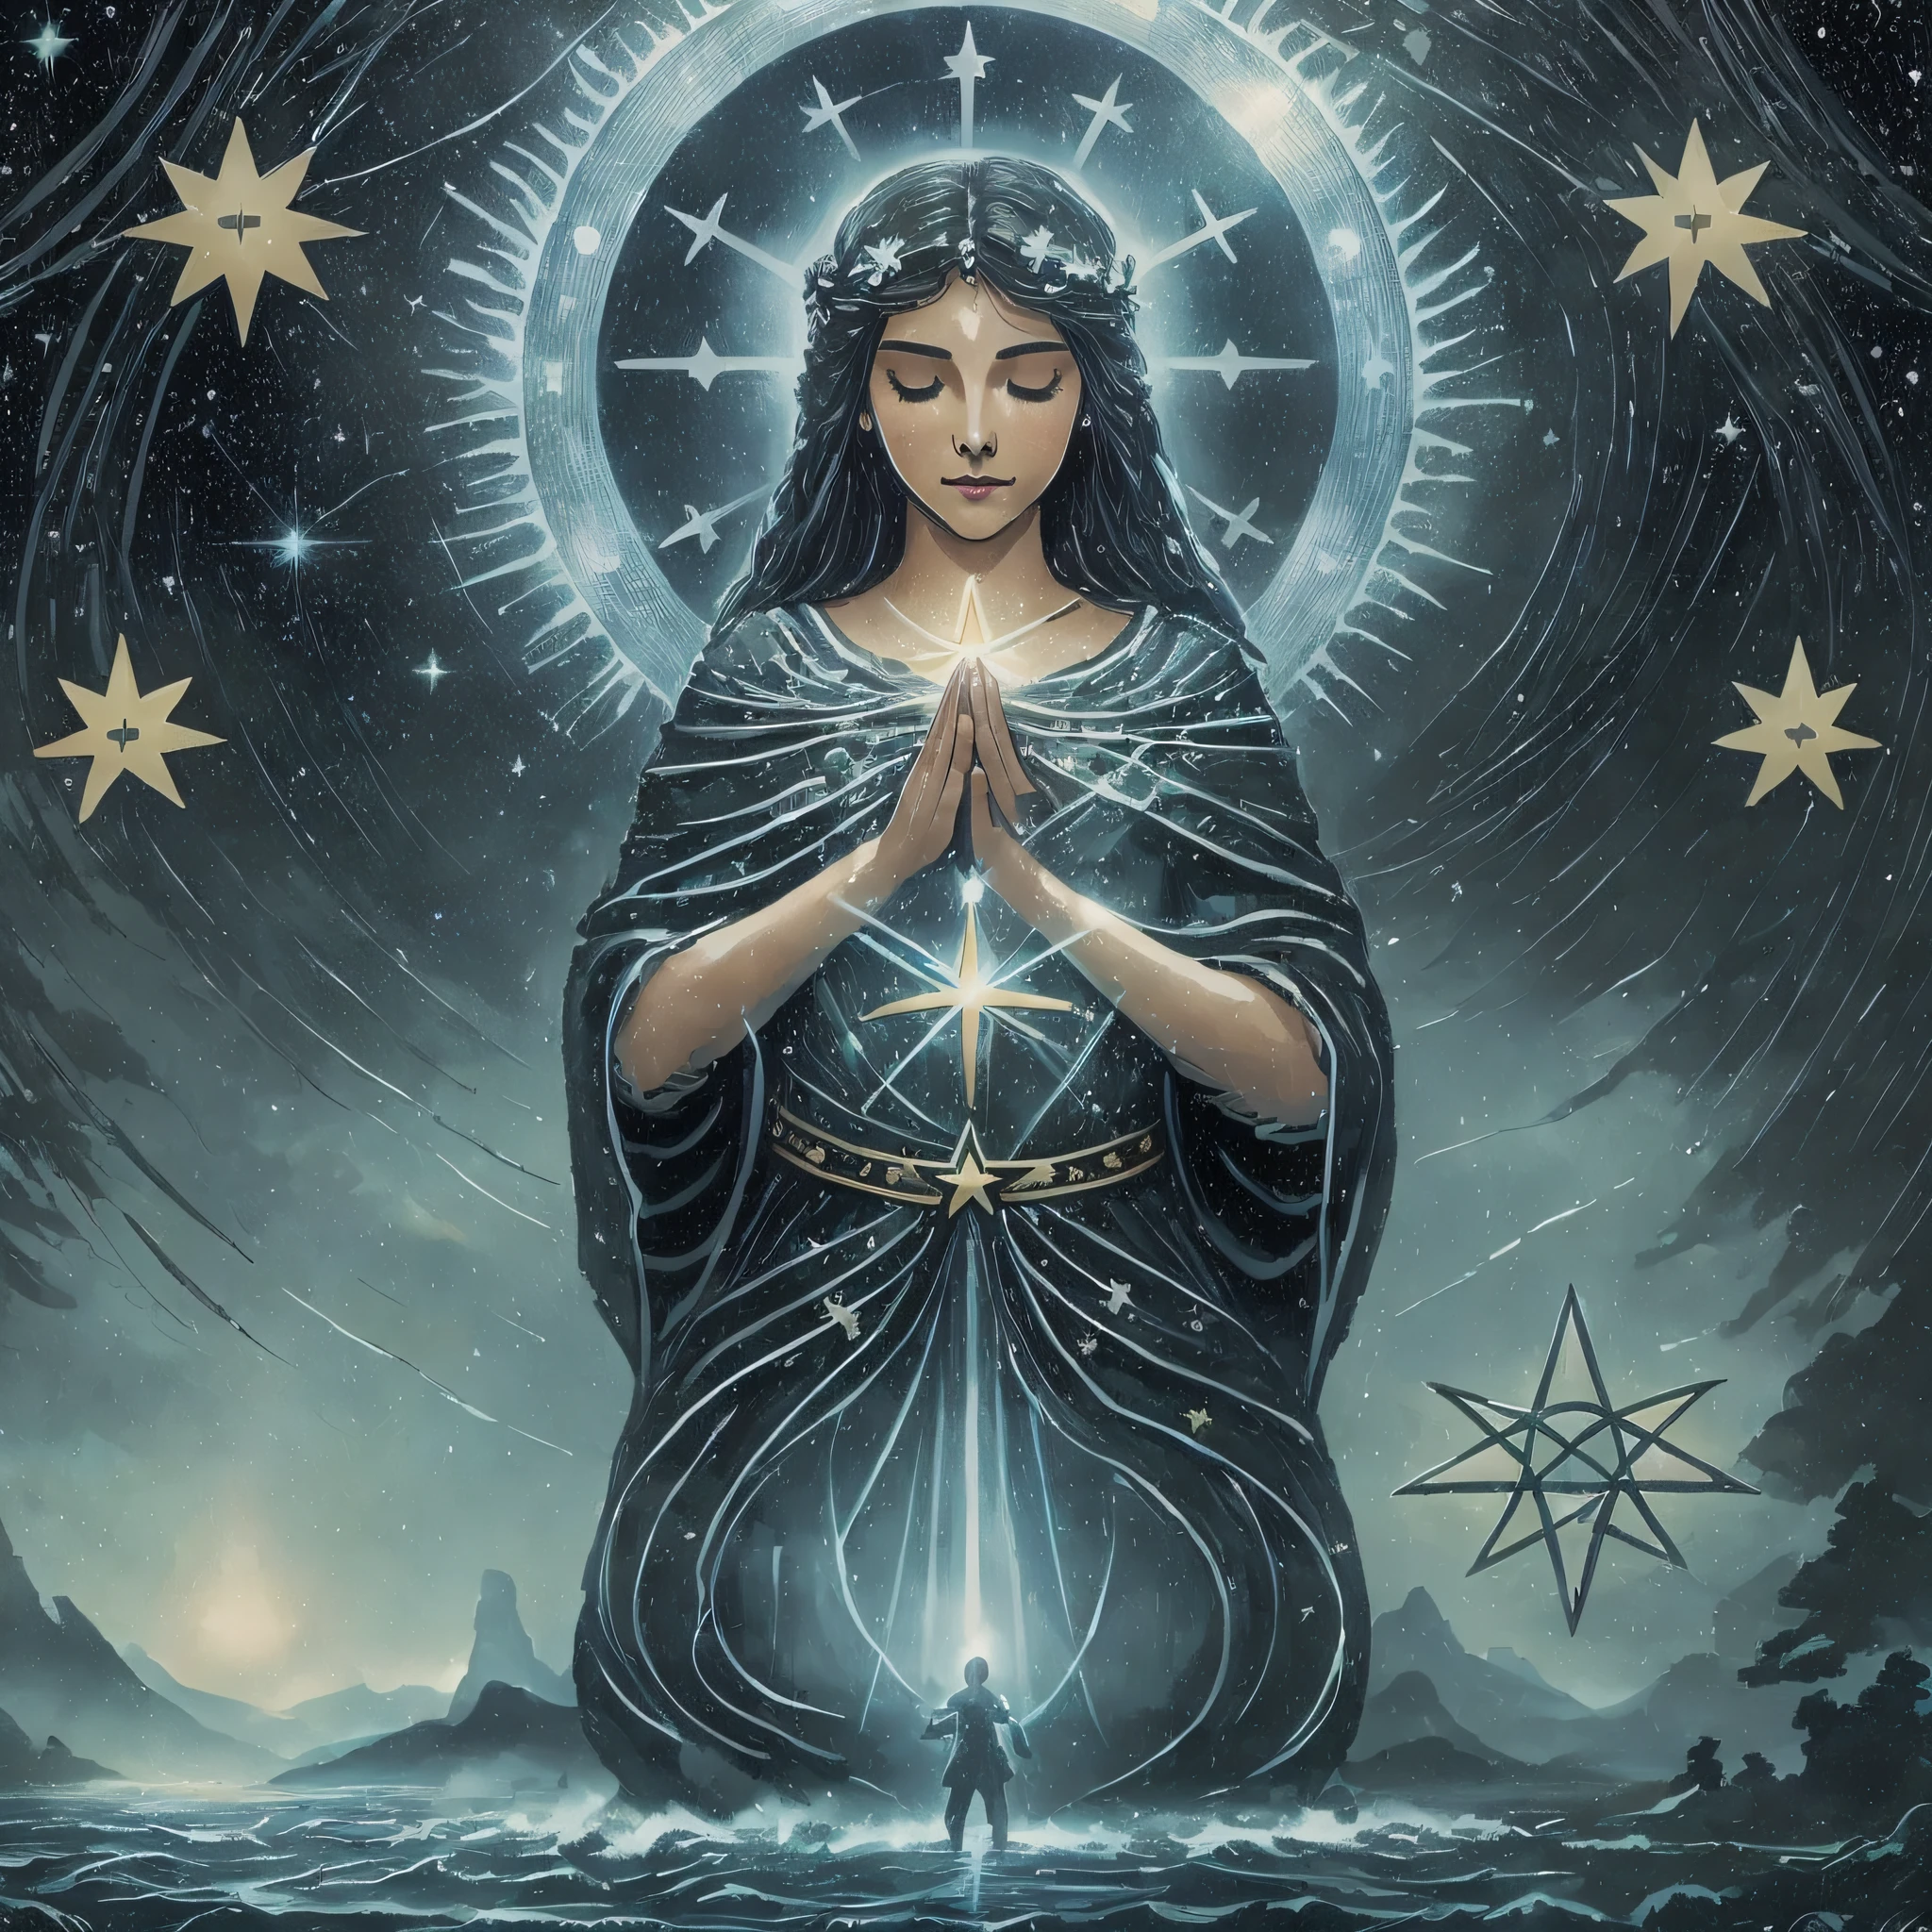 The card "The Star" in the Tarot is an image of hope and renewal. It depicts a, kneeling on the edge of a river, pouring water from two jugs. Above it, a bright star illuminates the night sky. The woman represents the connection between heaven and earth, and the water symbolizes the spiritual energy flowing into the physical world. The Star card evokes feelings of optimism, confidence and healing. It reminds us that even in the darkest moments, there is a bright light that guides us. The star in the sky represents divine guidance, showing us the way forward. It brings with it a sense of peace and tranquility, inviting us to connect with our intuition and follow our deepest dreams. The Star card encourages us to have hope, believe in ourselves, and seek inner harmony. It reminds us that we are able to heal, transform, and manifest our highest aspirations. The presence of the Star card in a reading often indicates a period of renewal, inspiration, and spiritual protection. It invites us to trust in our journey and to have faith in a better future.